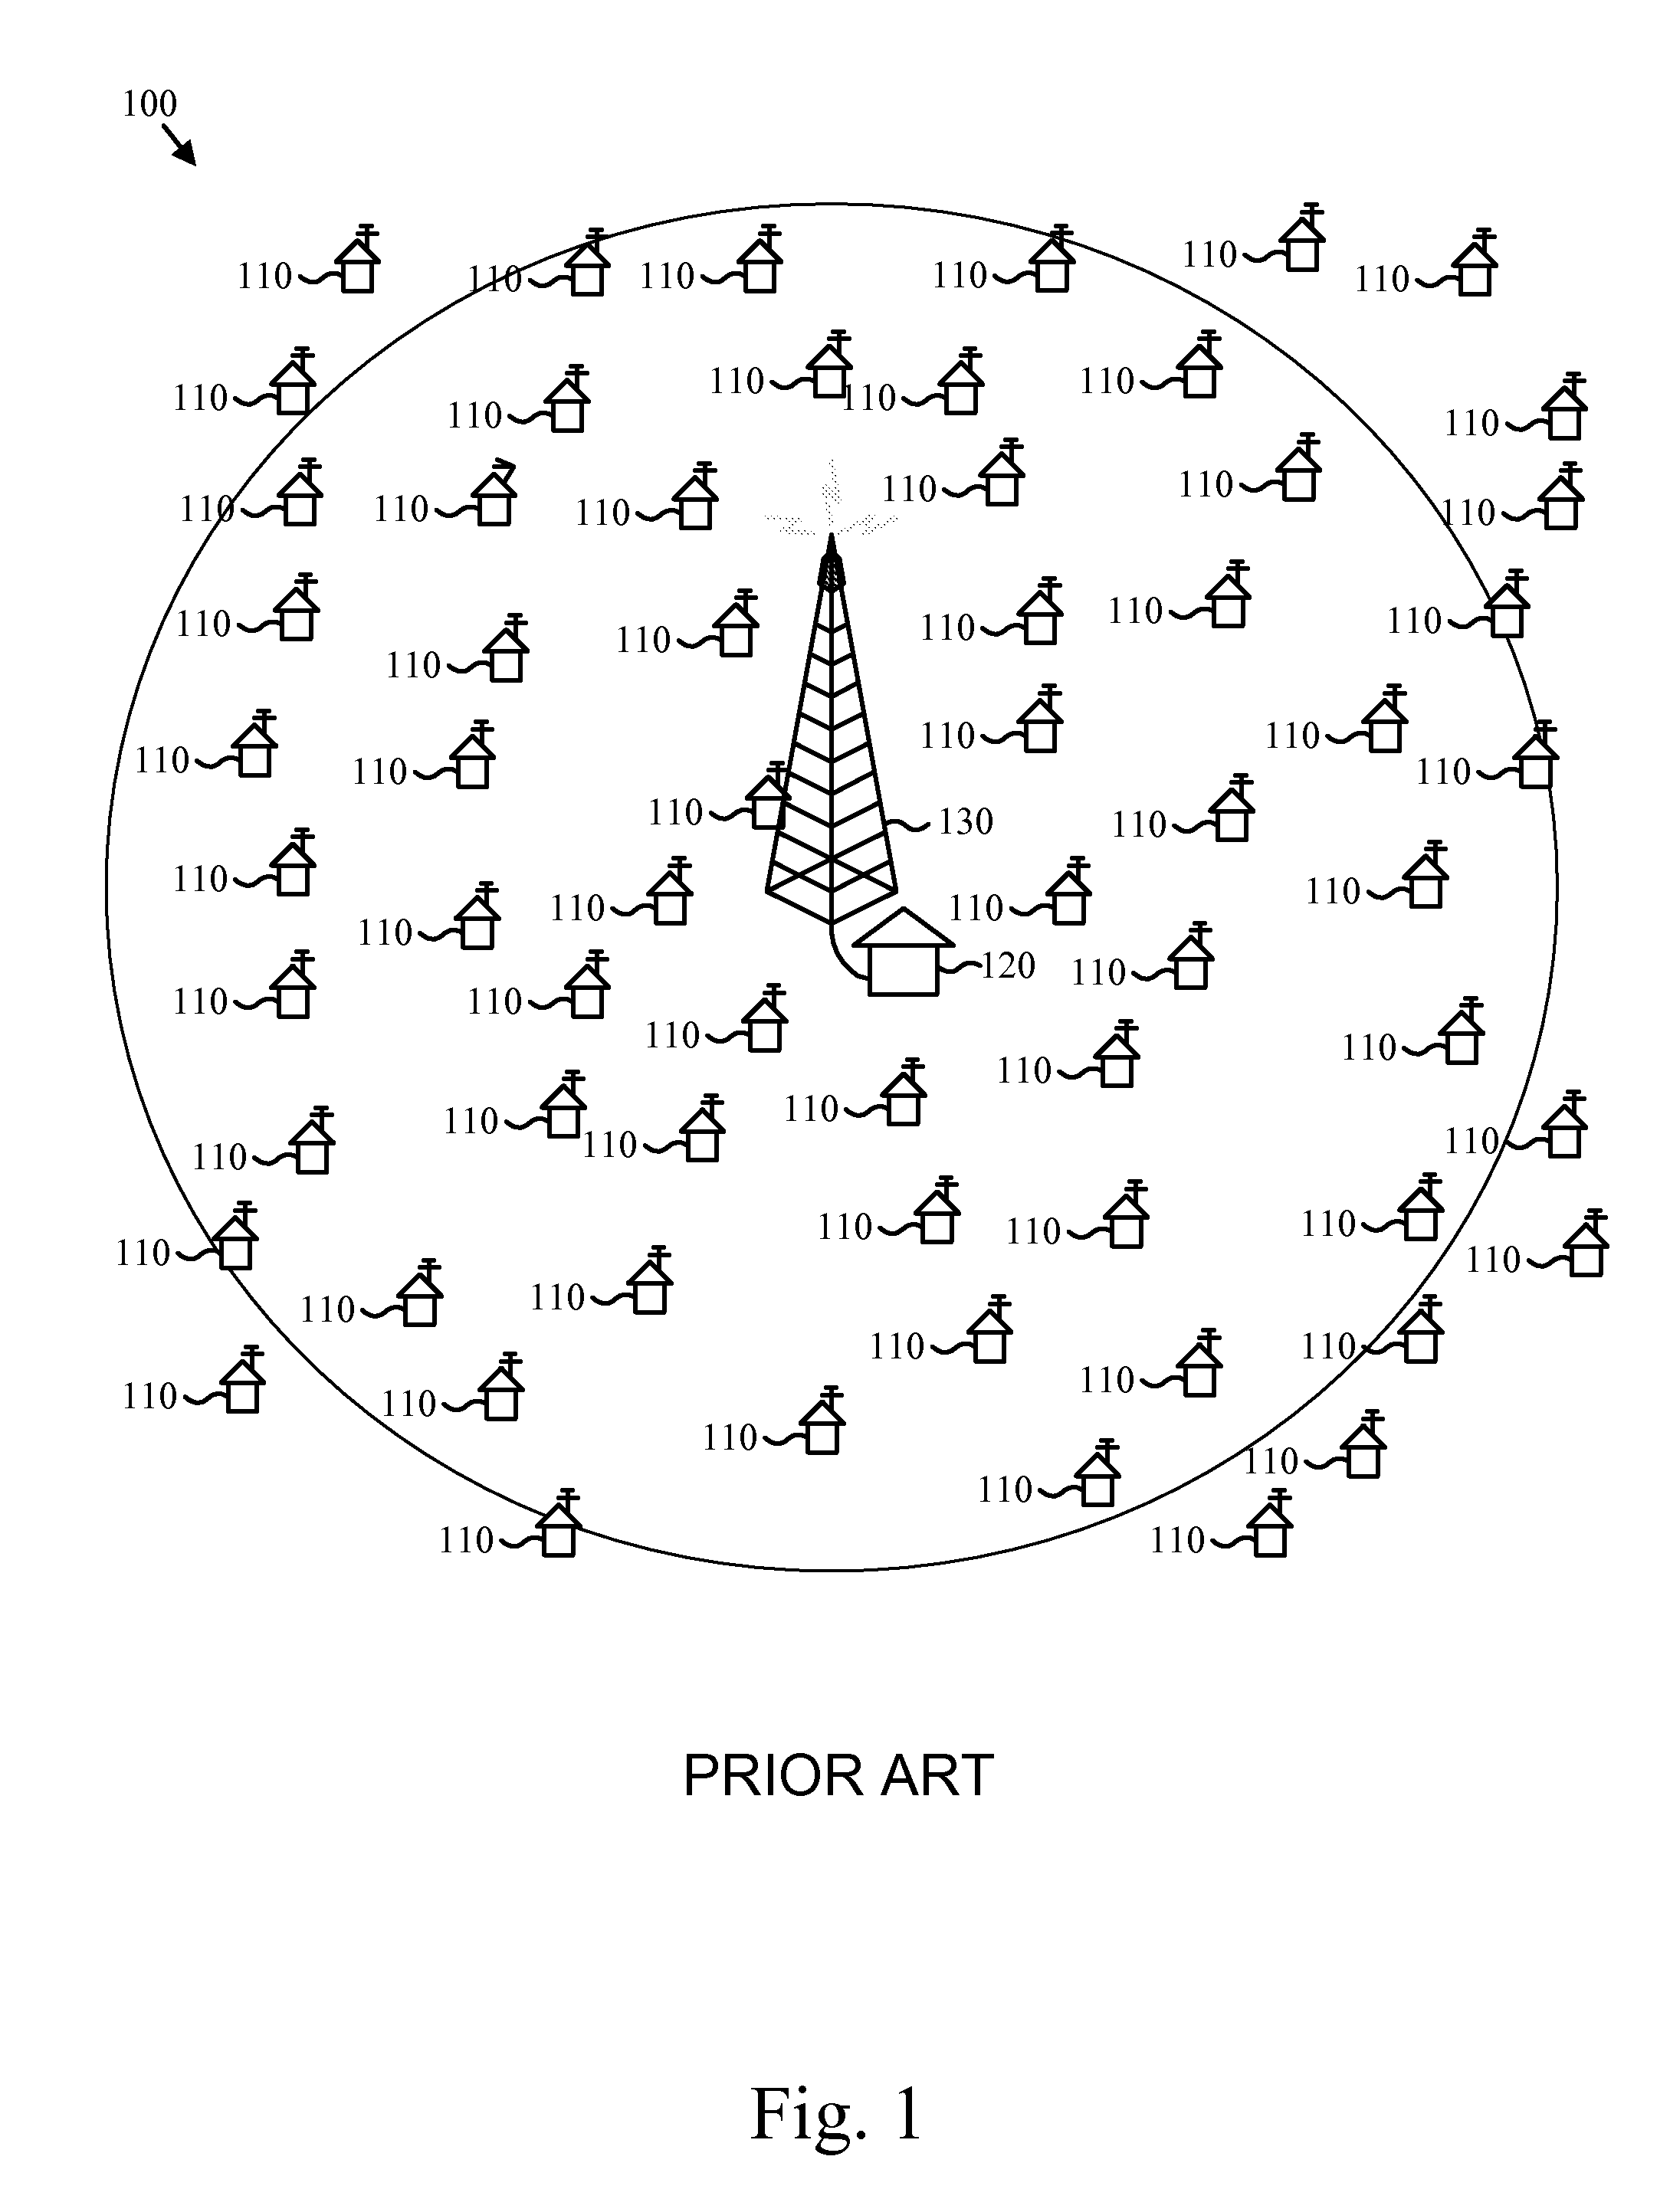 Apparatus method and system for providing enhanced digital services using an analog broadcast license